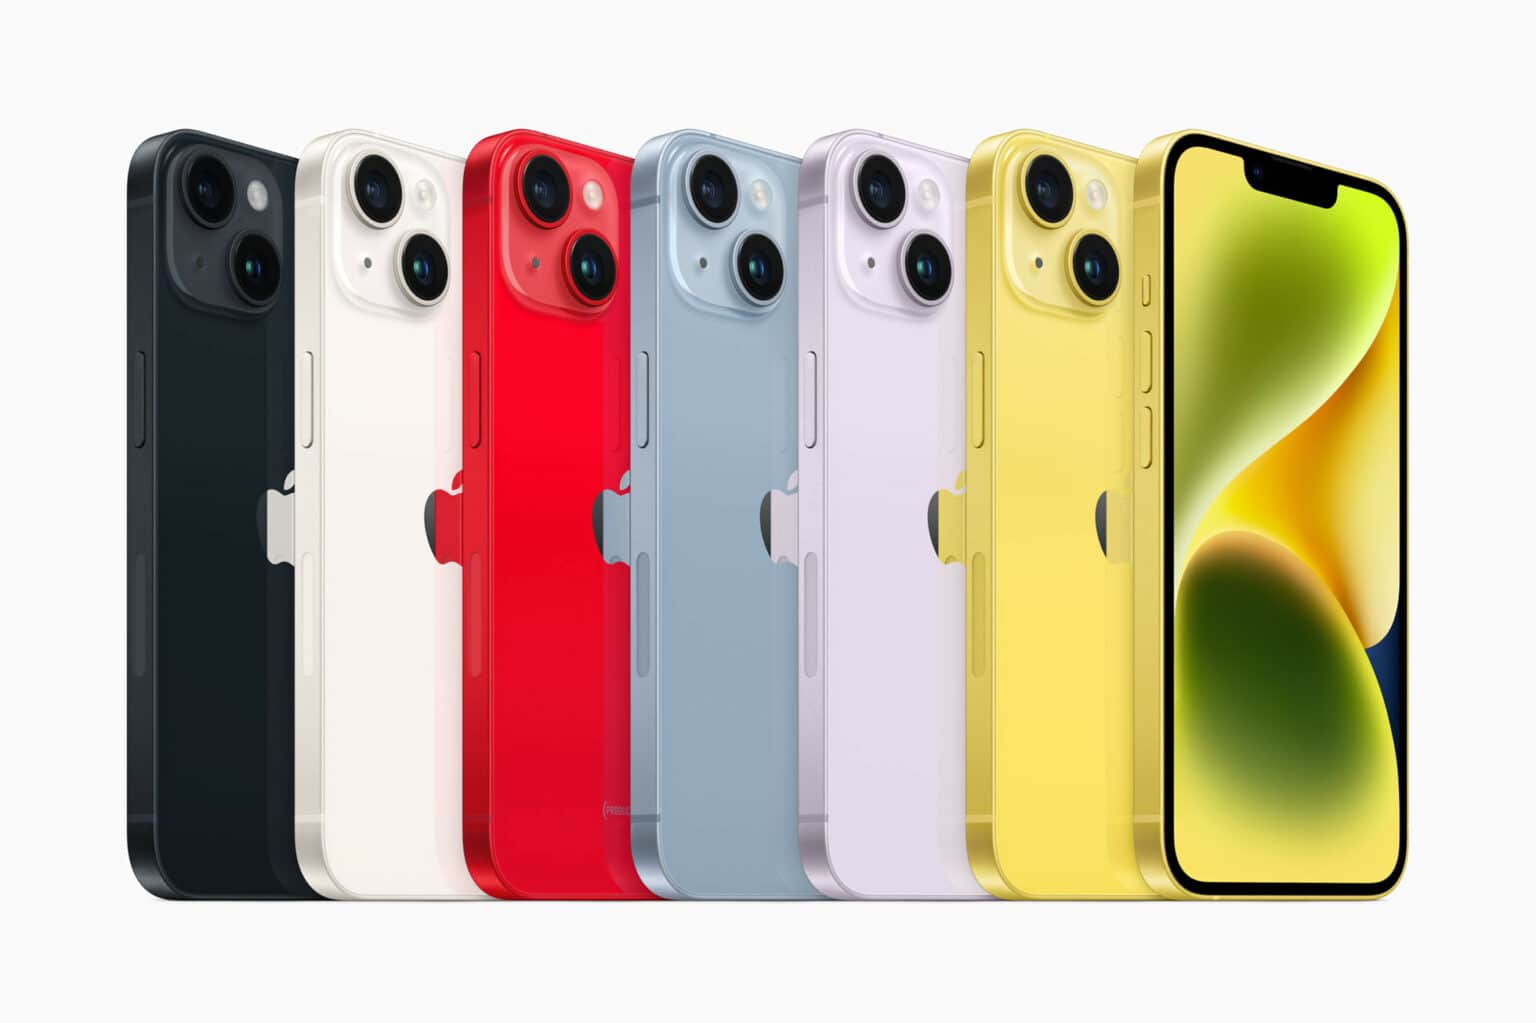 iPhone 14 lineup colors: You can't miss the yellow one on the right. The others are midnight, starlight, Product (Red), blue and purple.